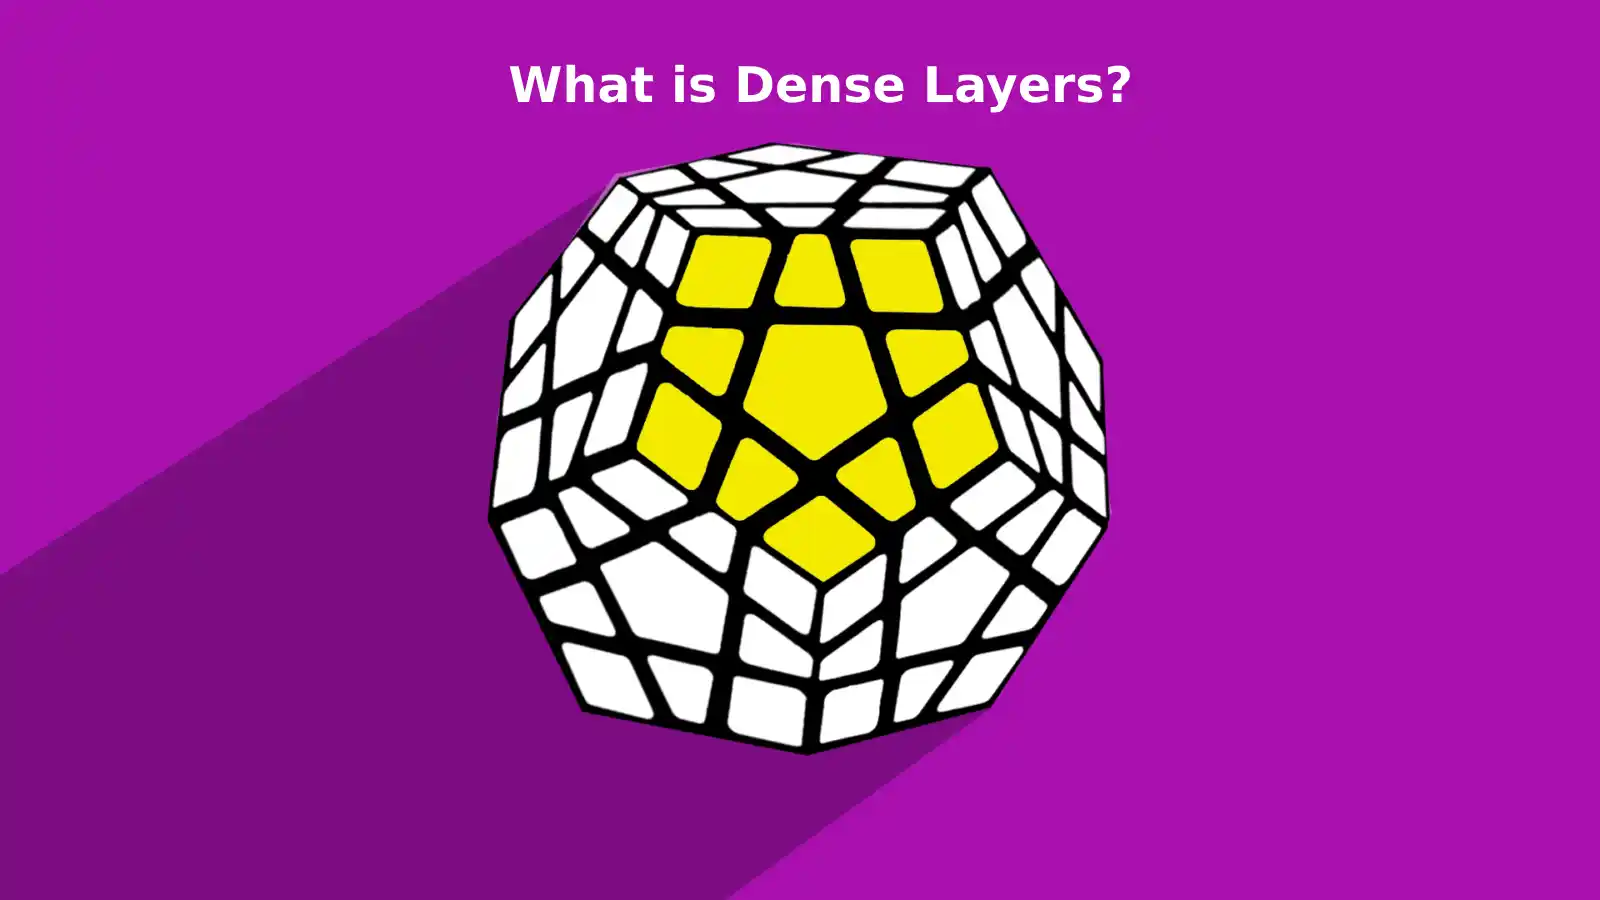 What is Dense Layer